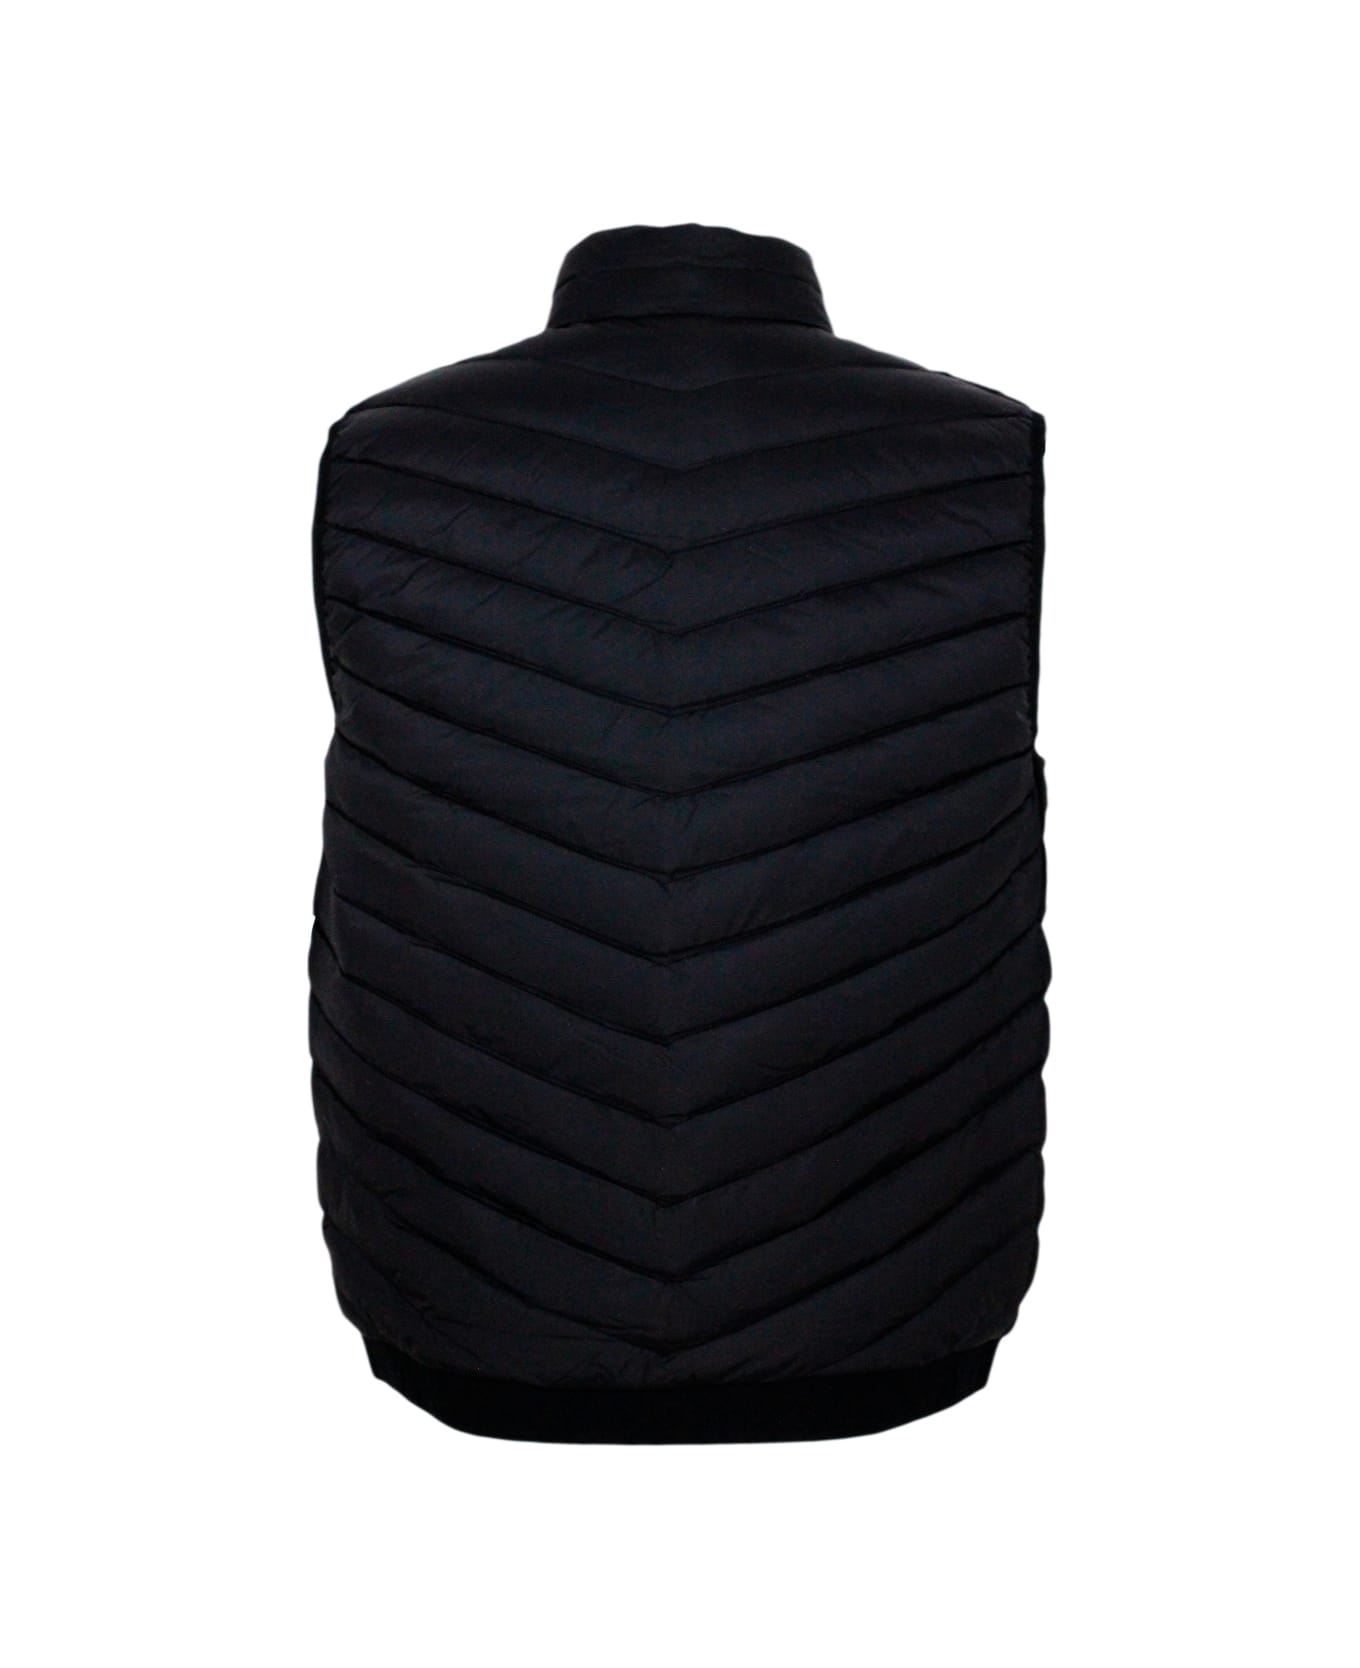 Armani Collezioni Sleeveless Vest In Light Down Jacket With Logoed And Elasticated Bottom And Zip Closure - Black ベスト